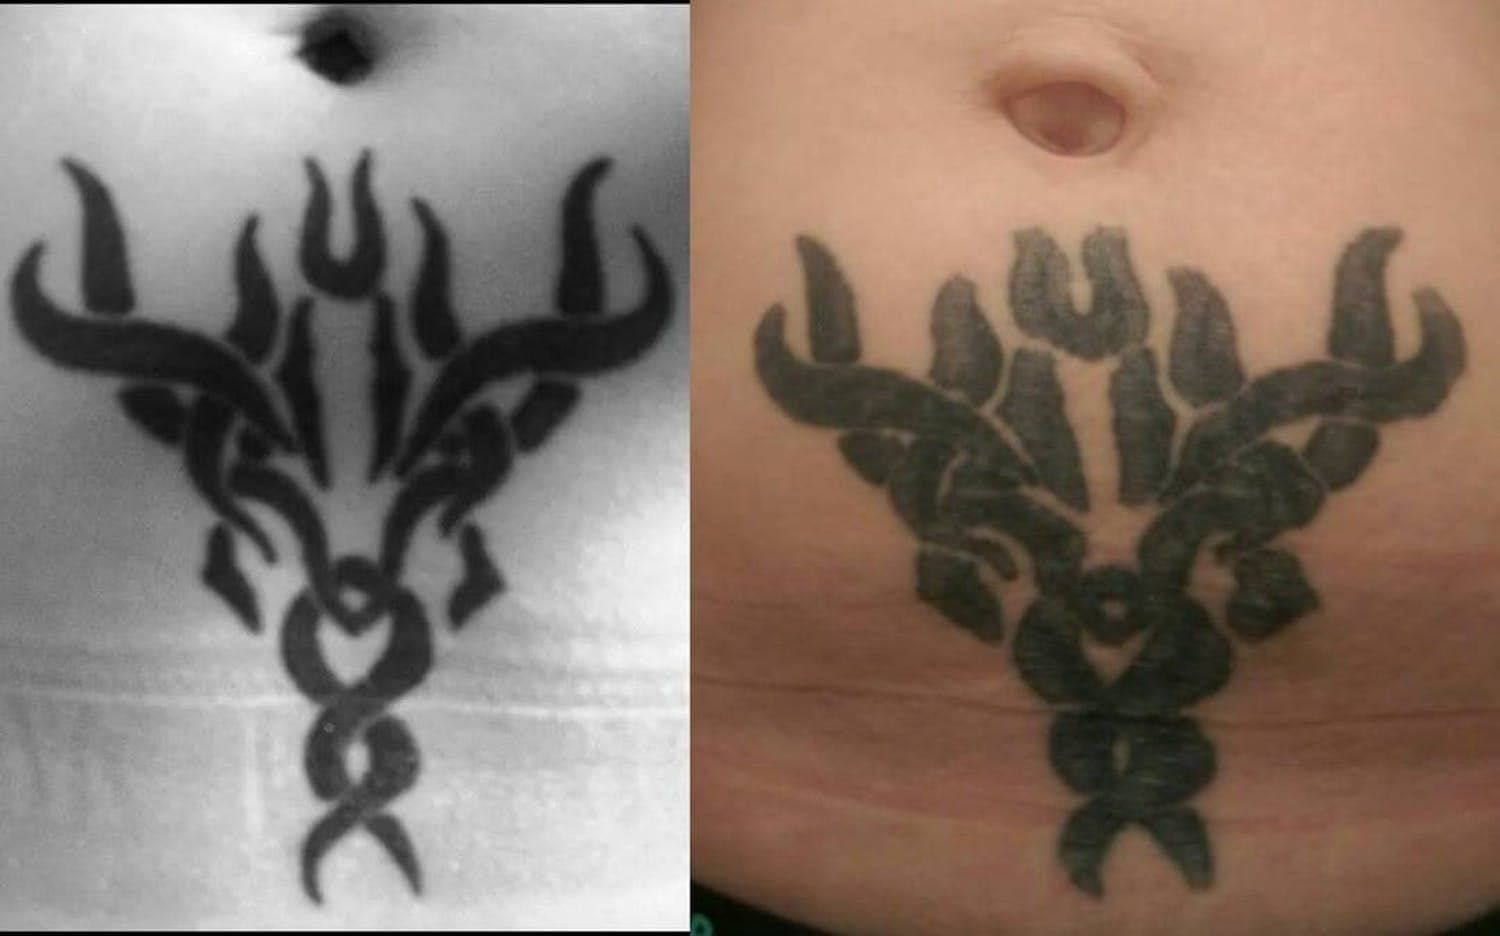 Moms Flower Tattoo While Pregnant Will Remind You To Think Before You Ink